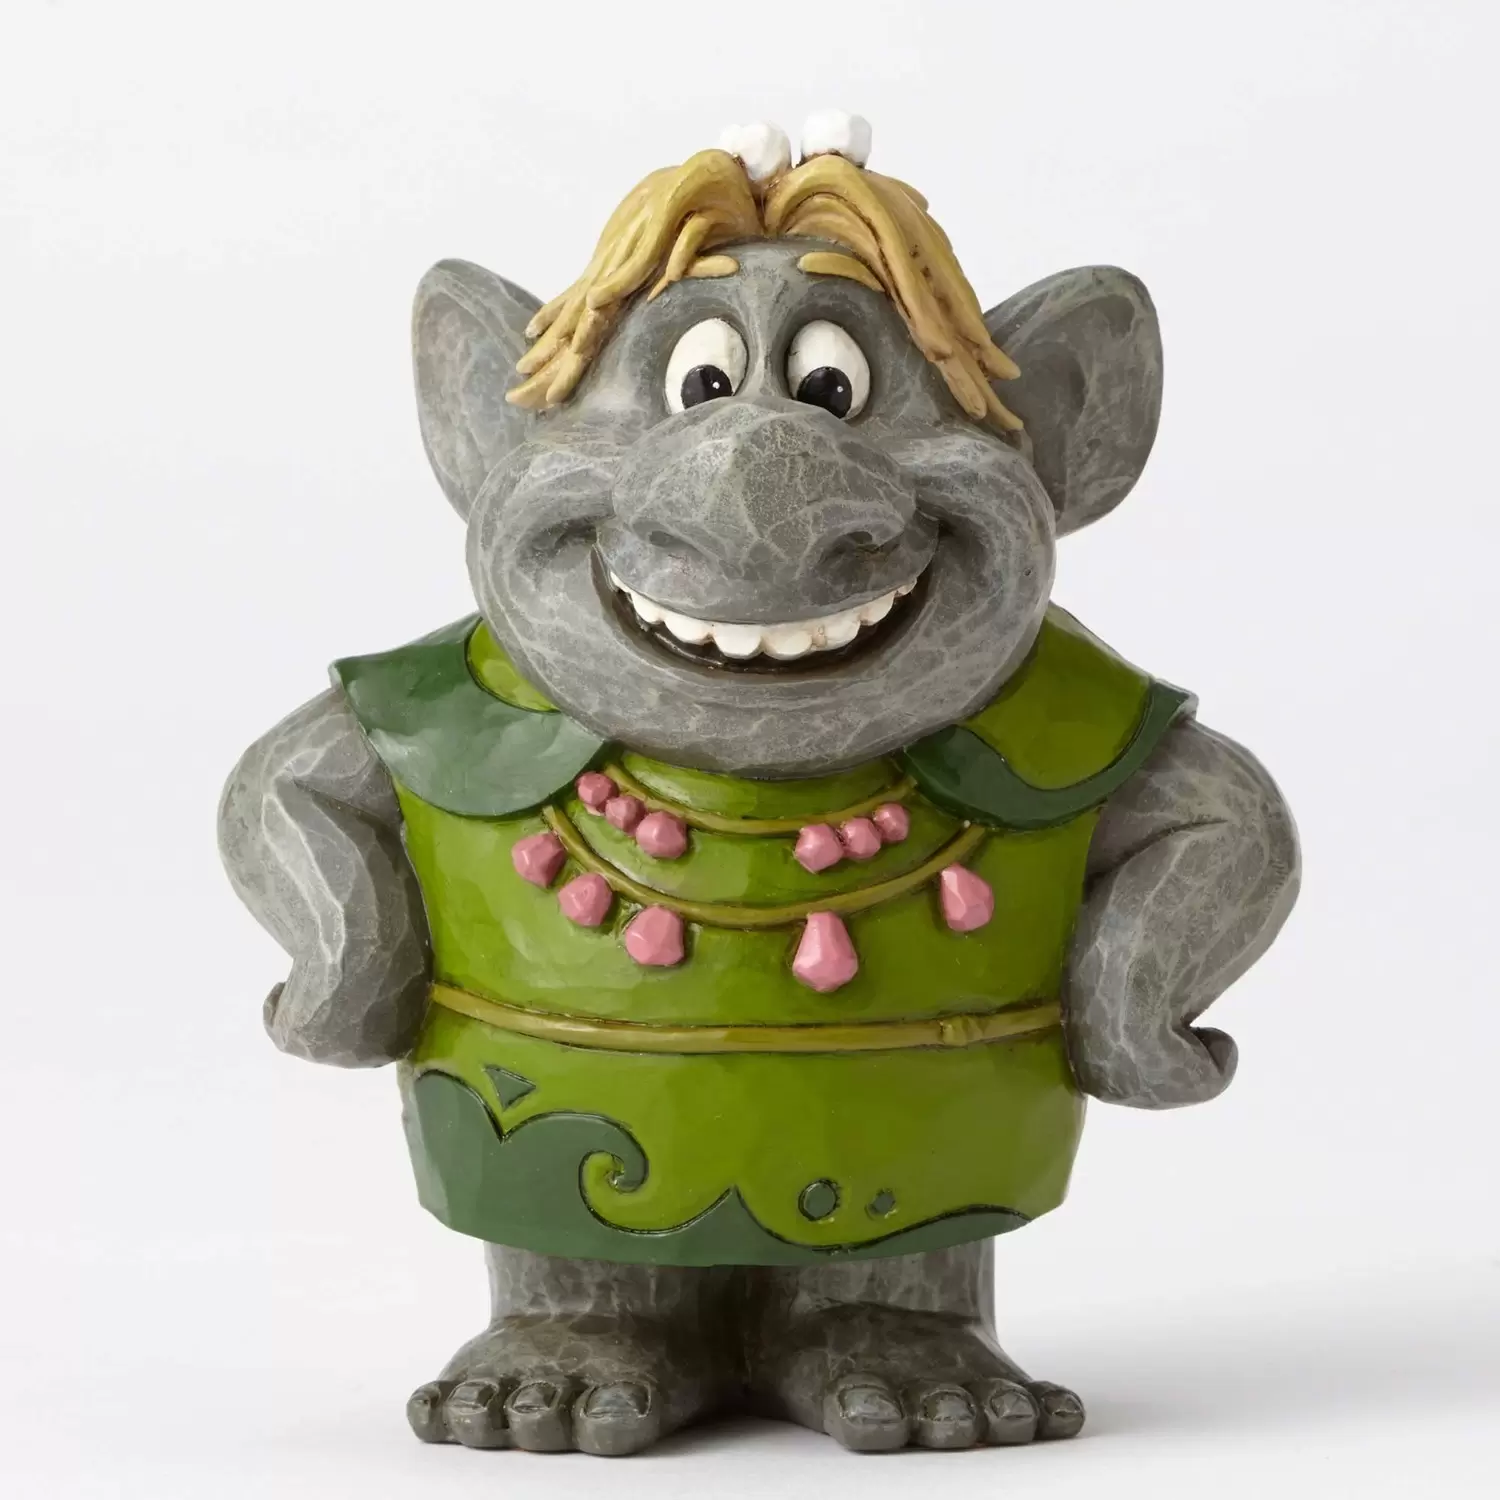 Disney Traditions by Jim Shore - Mother Troll - Bulda from Frozen